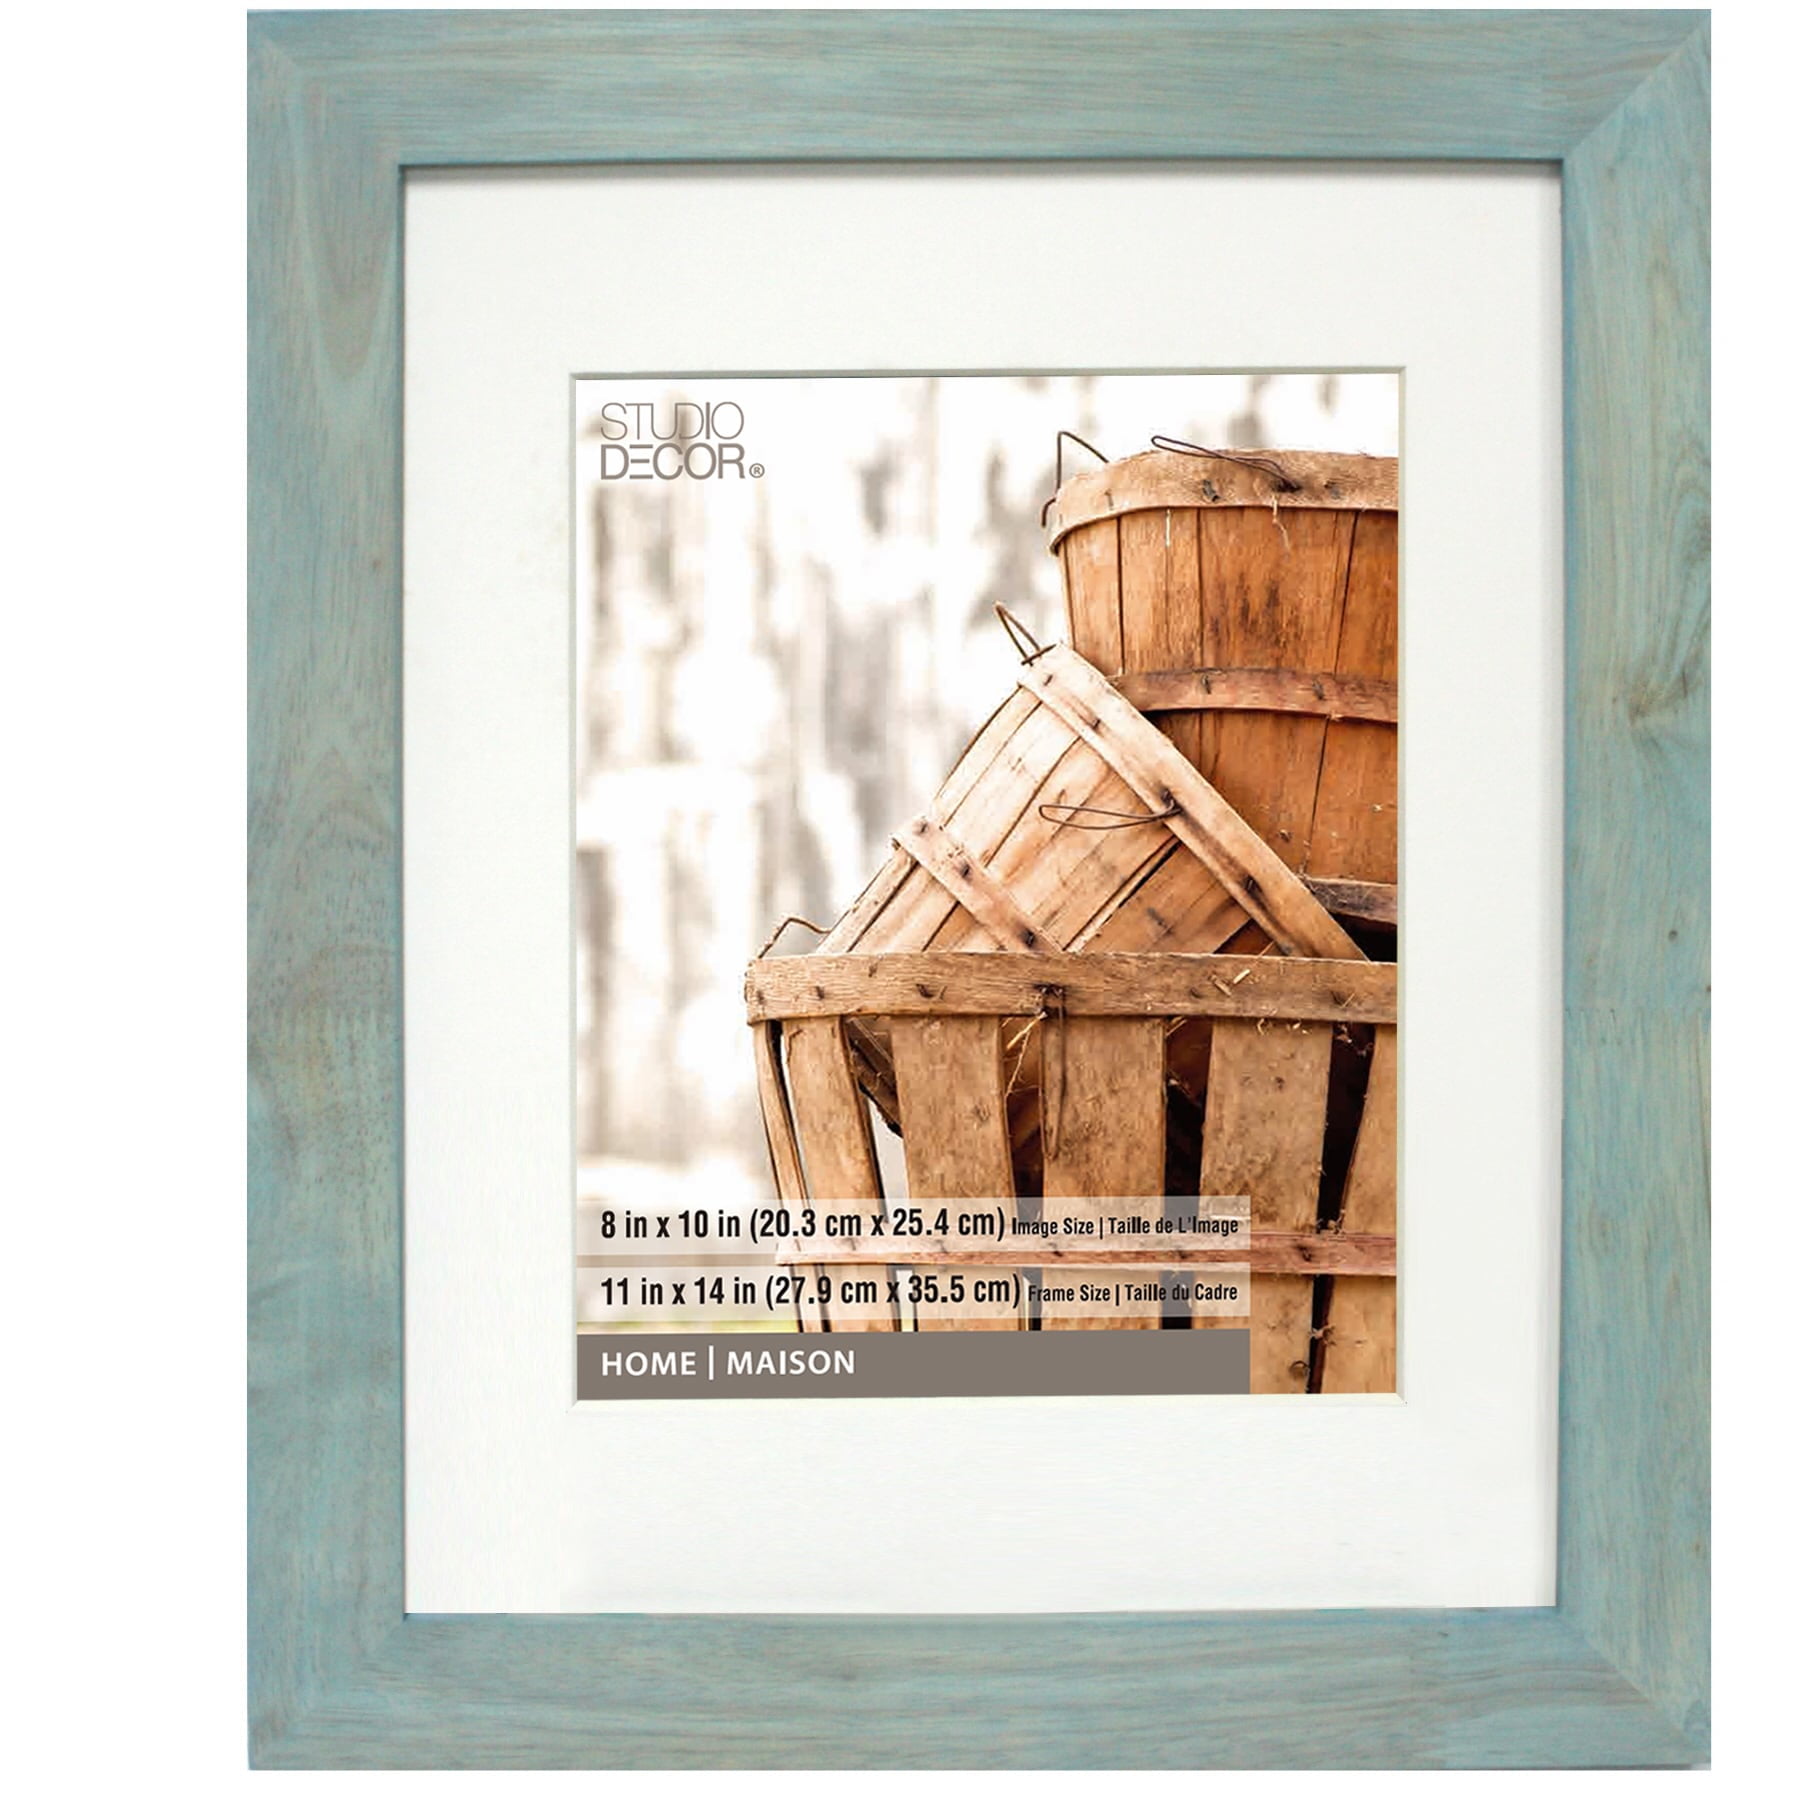 Studio Decor, Accents, Wall Frame 8x Matted To 5x7